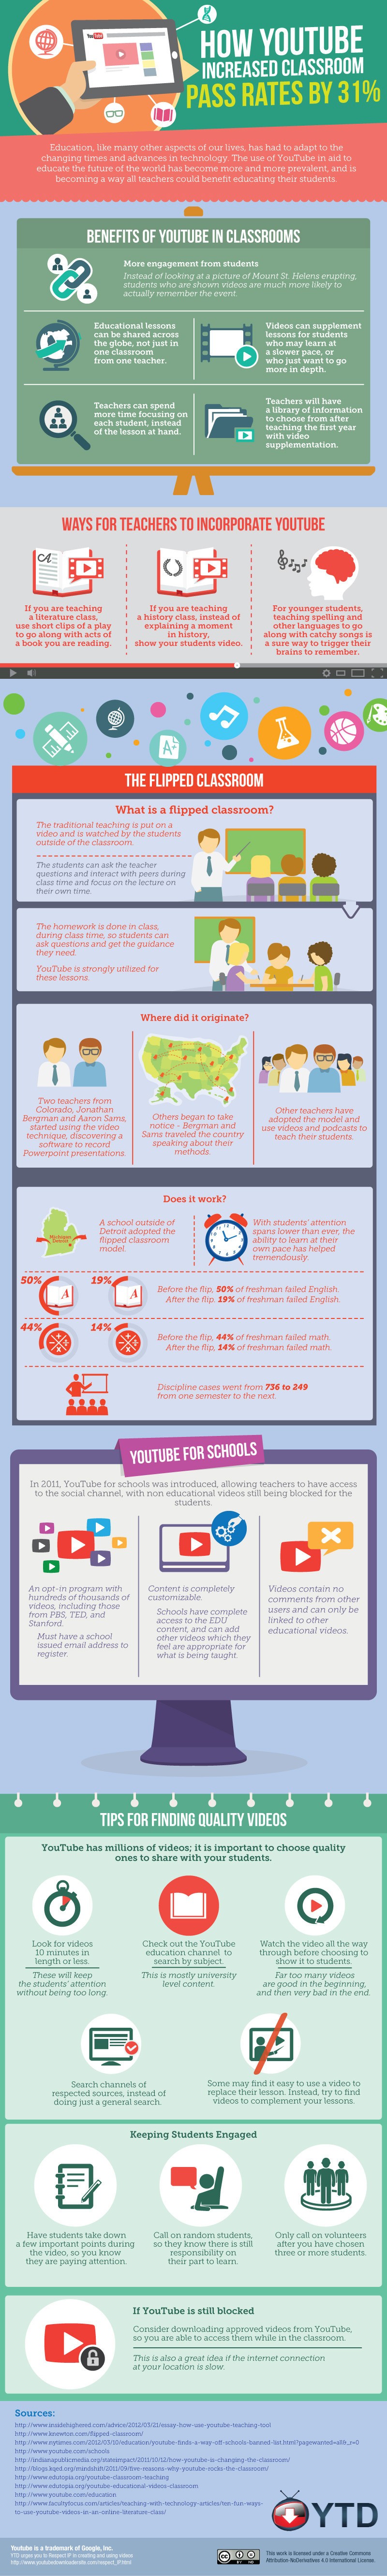 How-YouTube-Increases-Classroom-Pass-Rates-Infographic